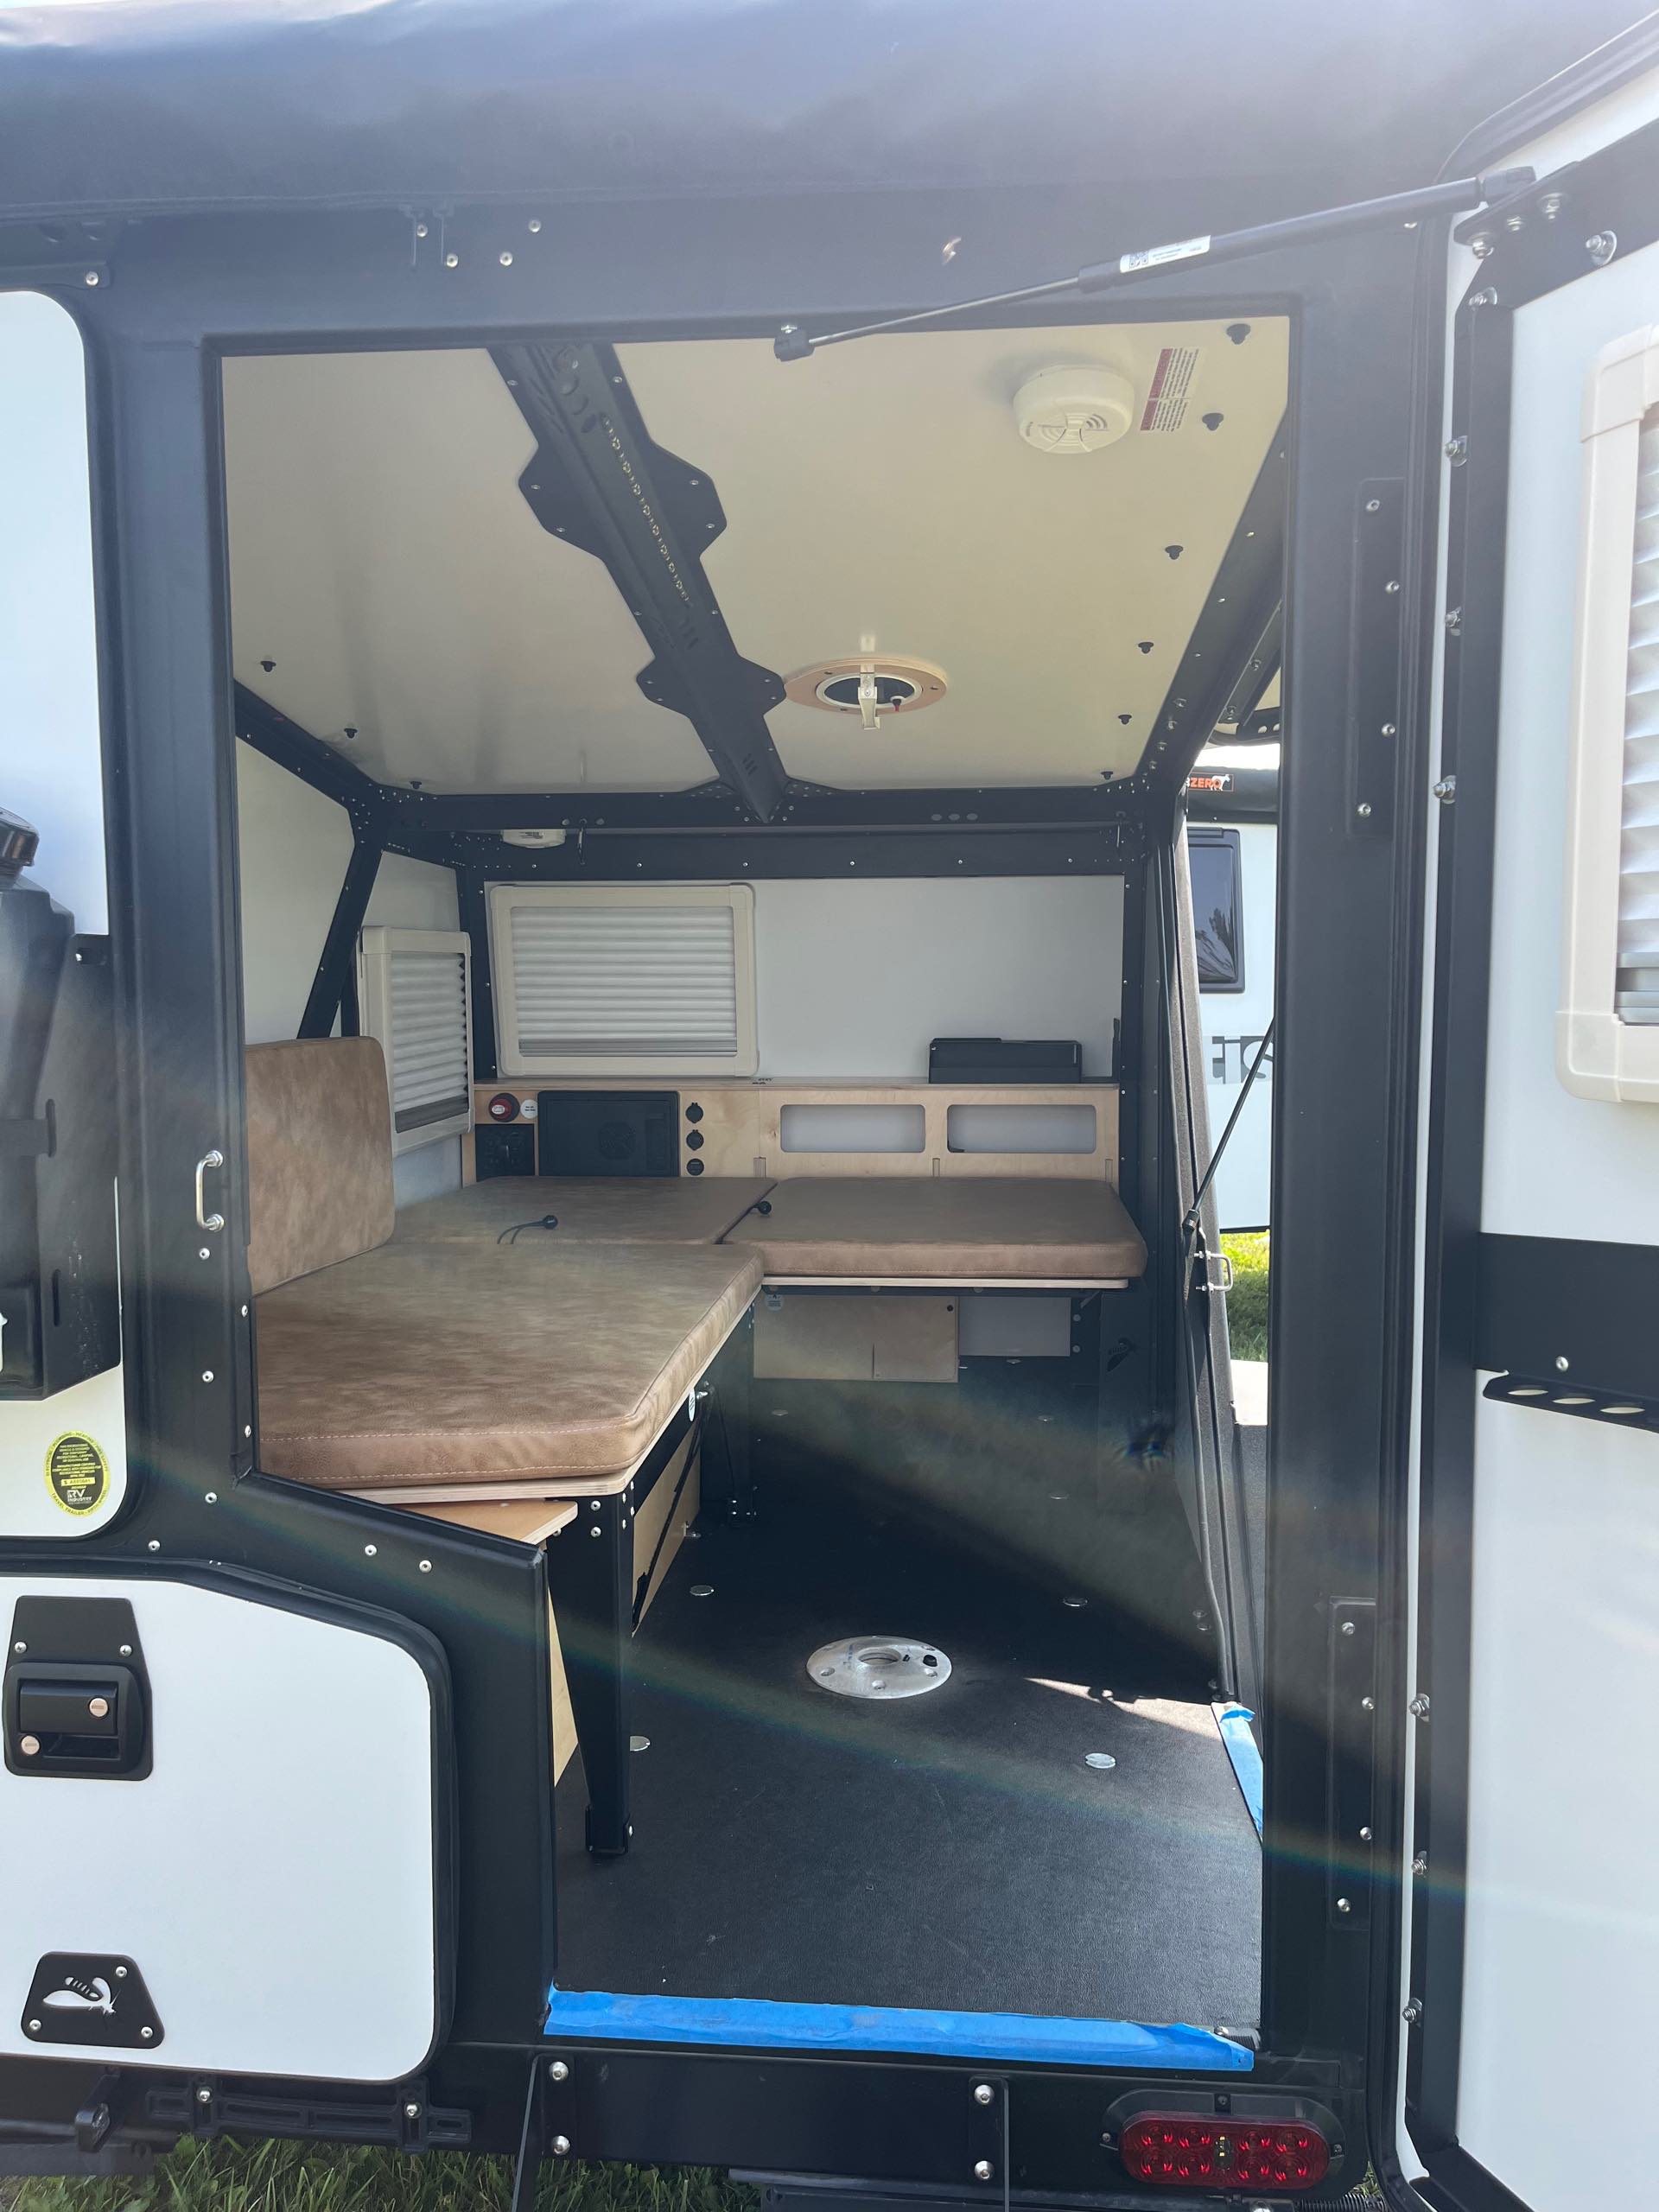 2023 TAXA OUTDOORS TigerMoth at Prosser's Premium RV Outlet